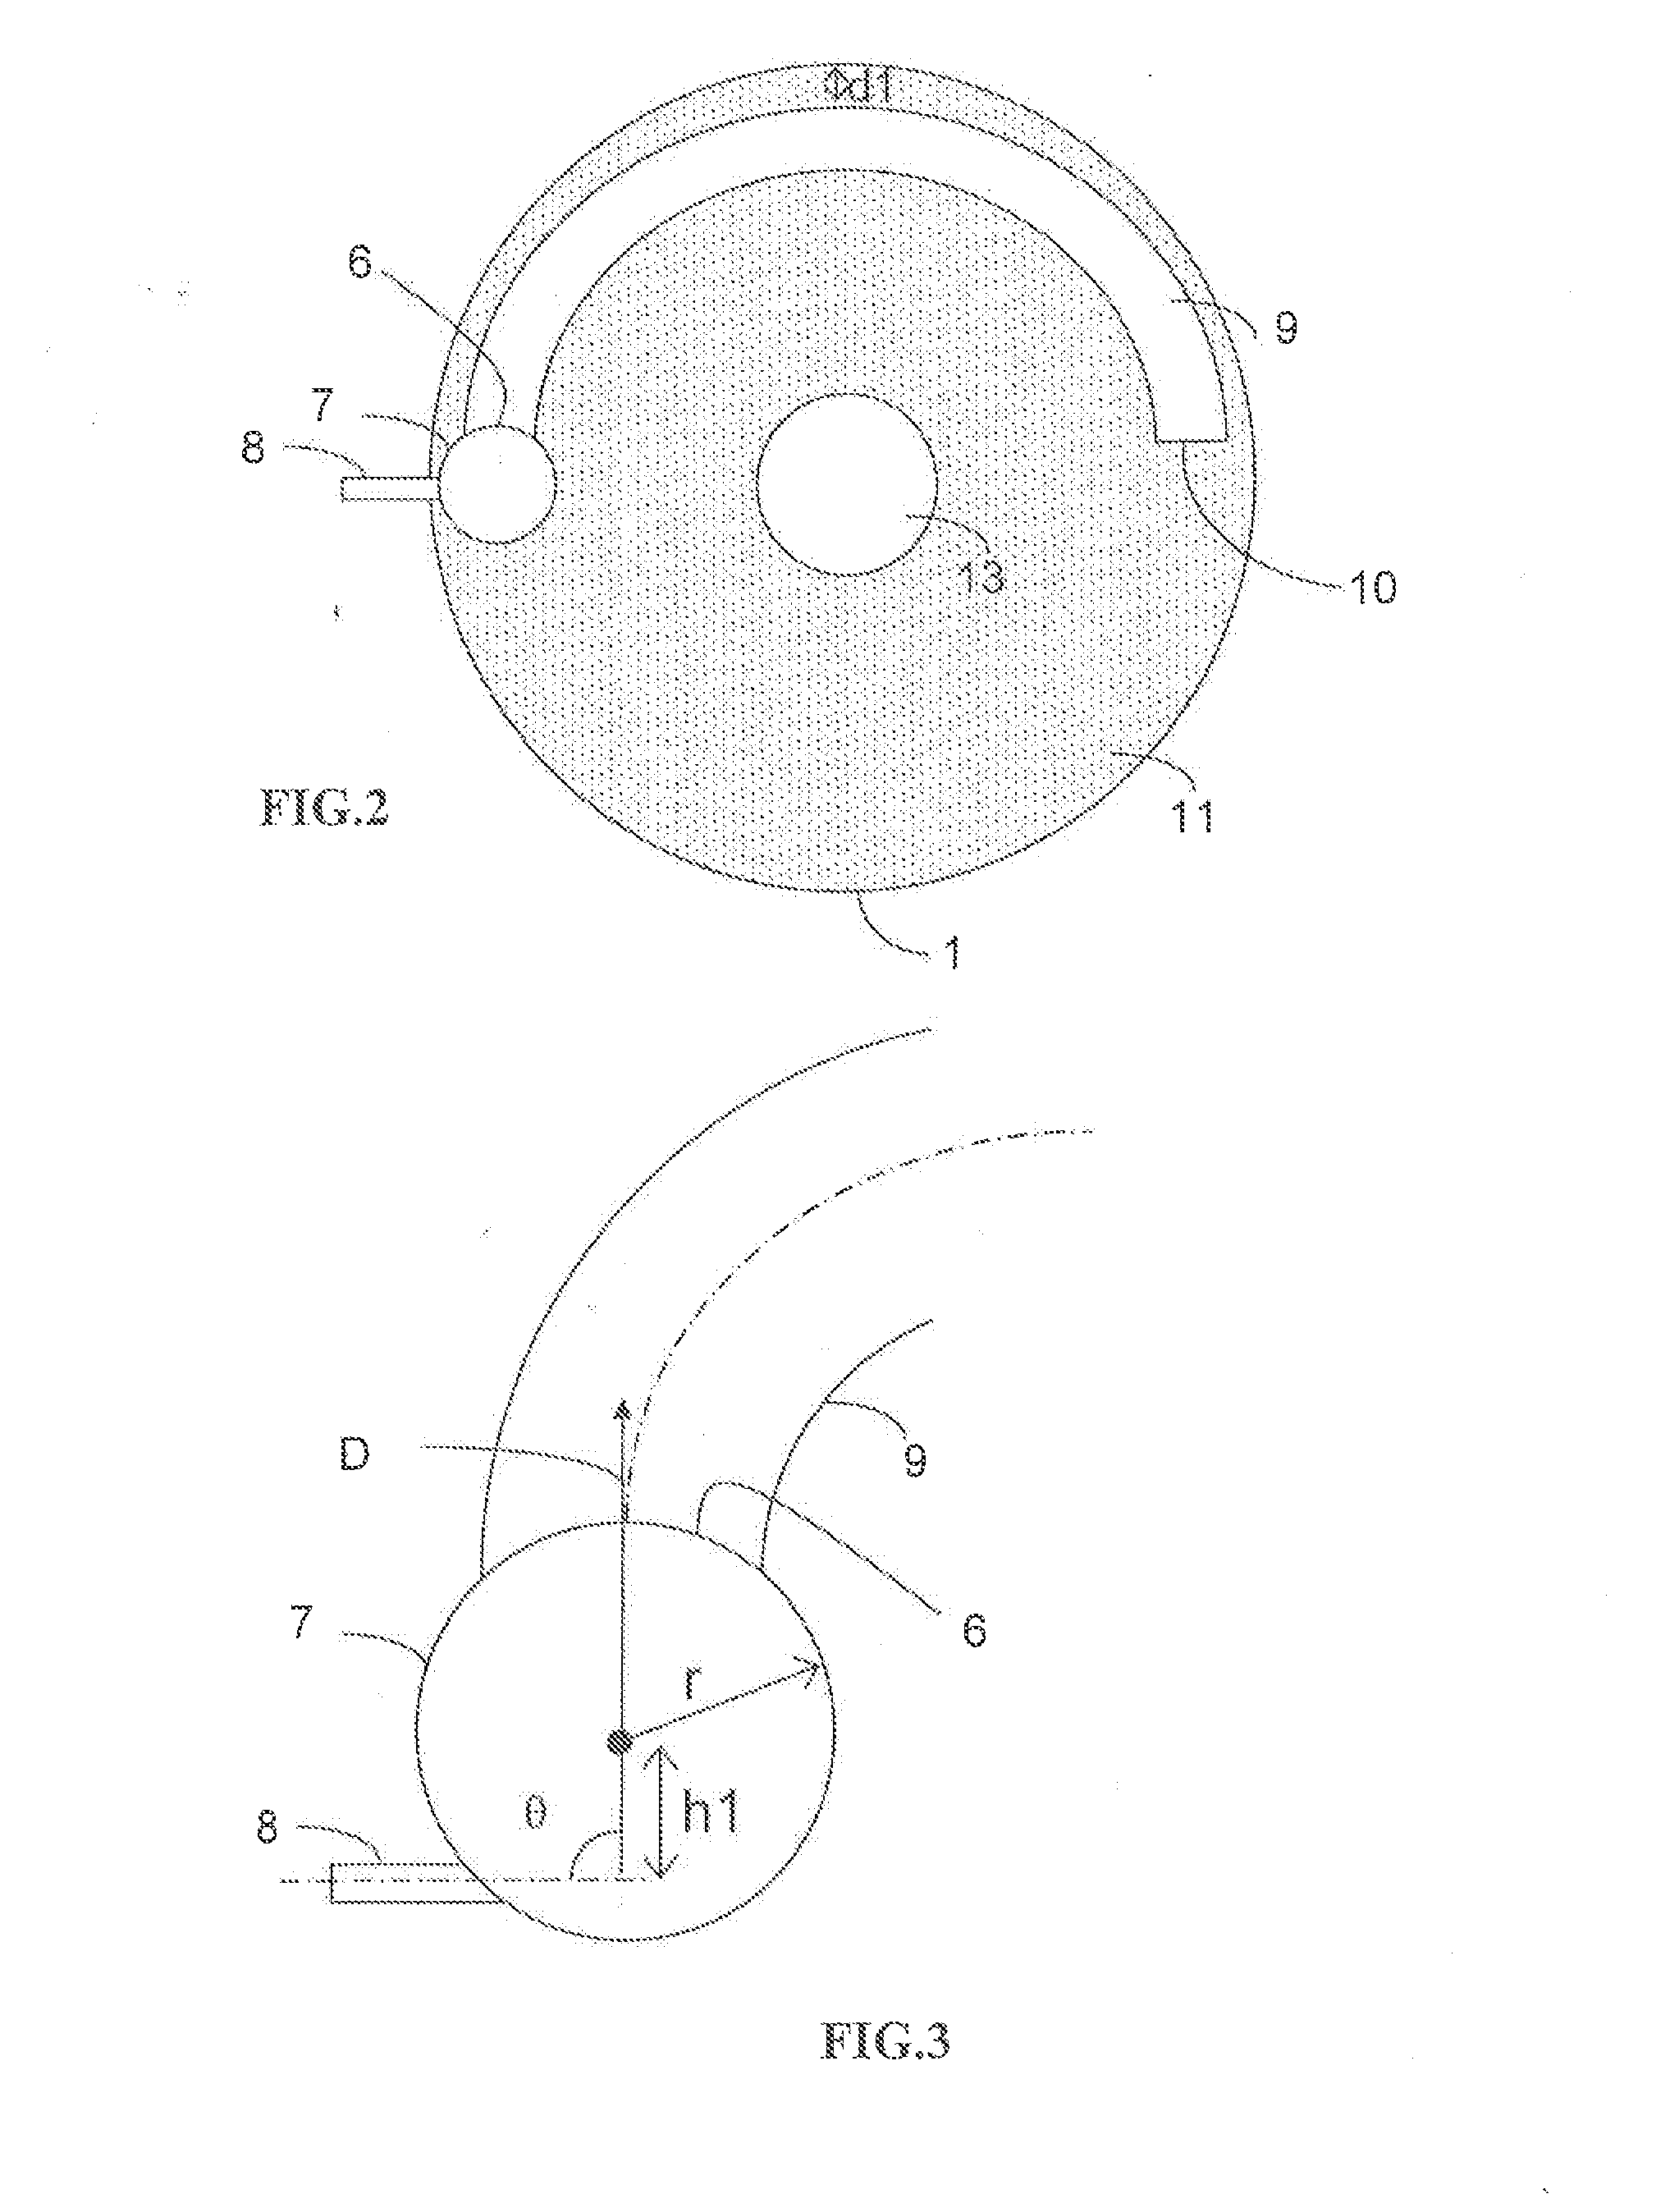 Device for injecting and mixing fluids in a downward-flow reactor